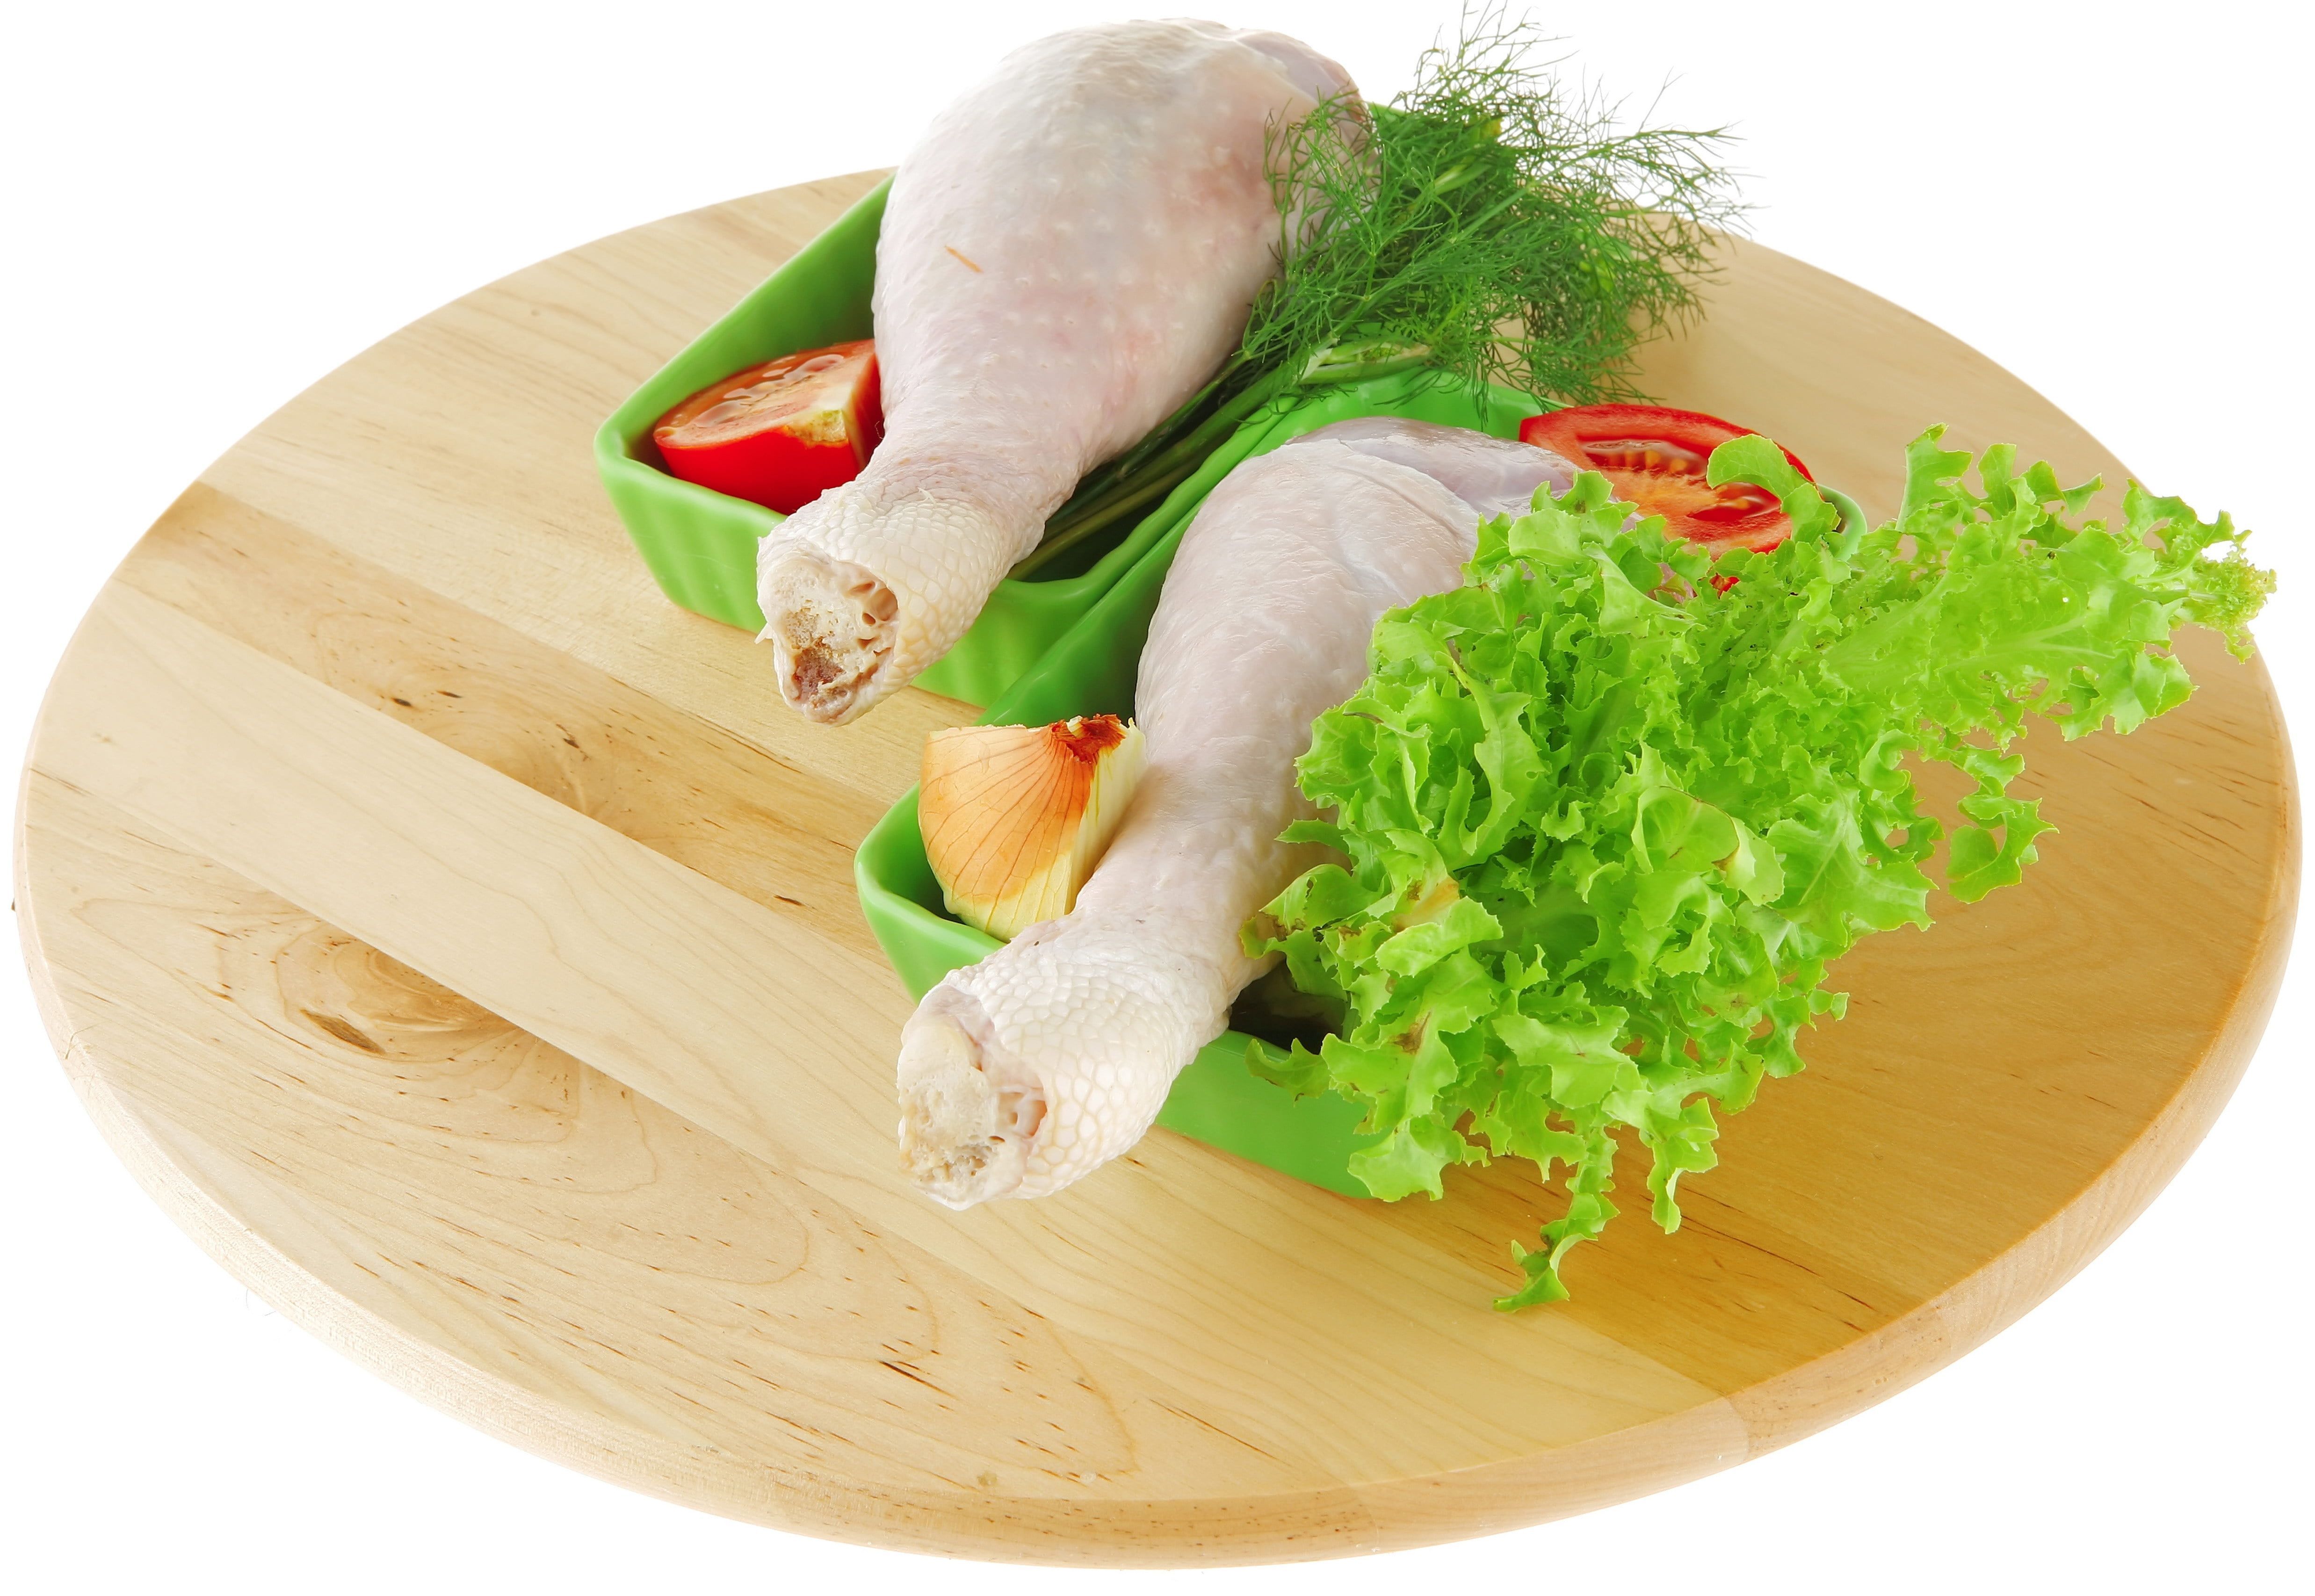 two raw chicken drumsticks chicken legs #meat #greens #vegetables small board white background K #wa. Food background wallpaper, Chicken drumsticks, Vegetables